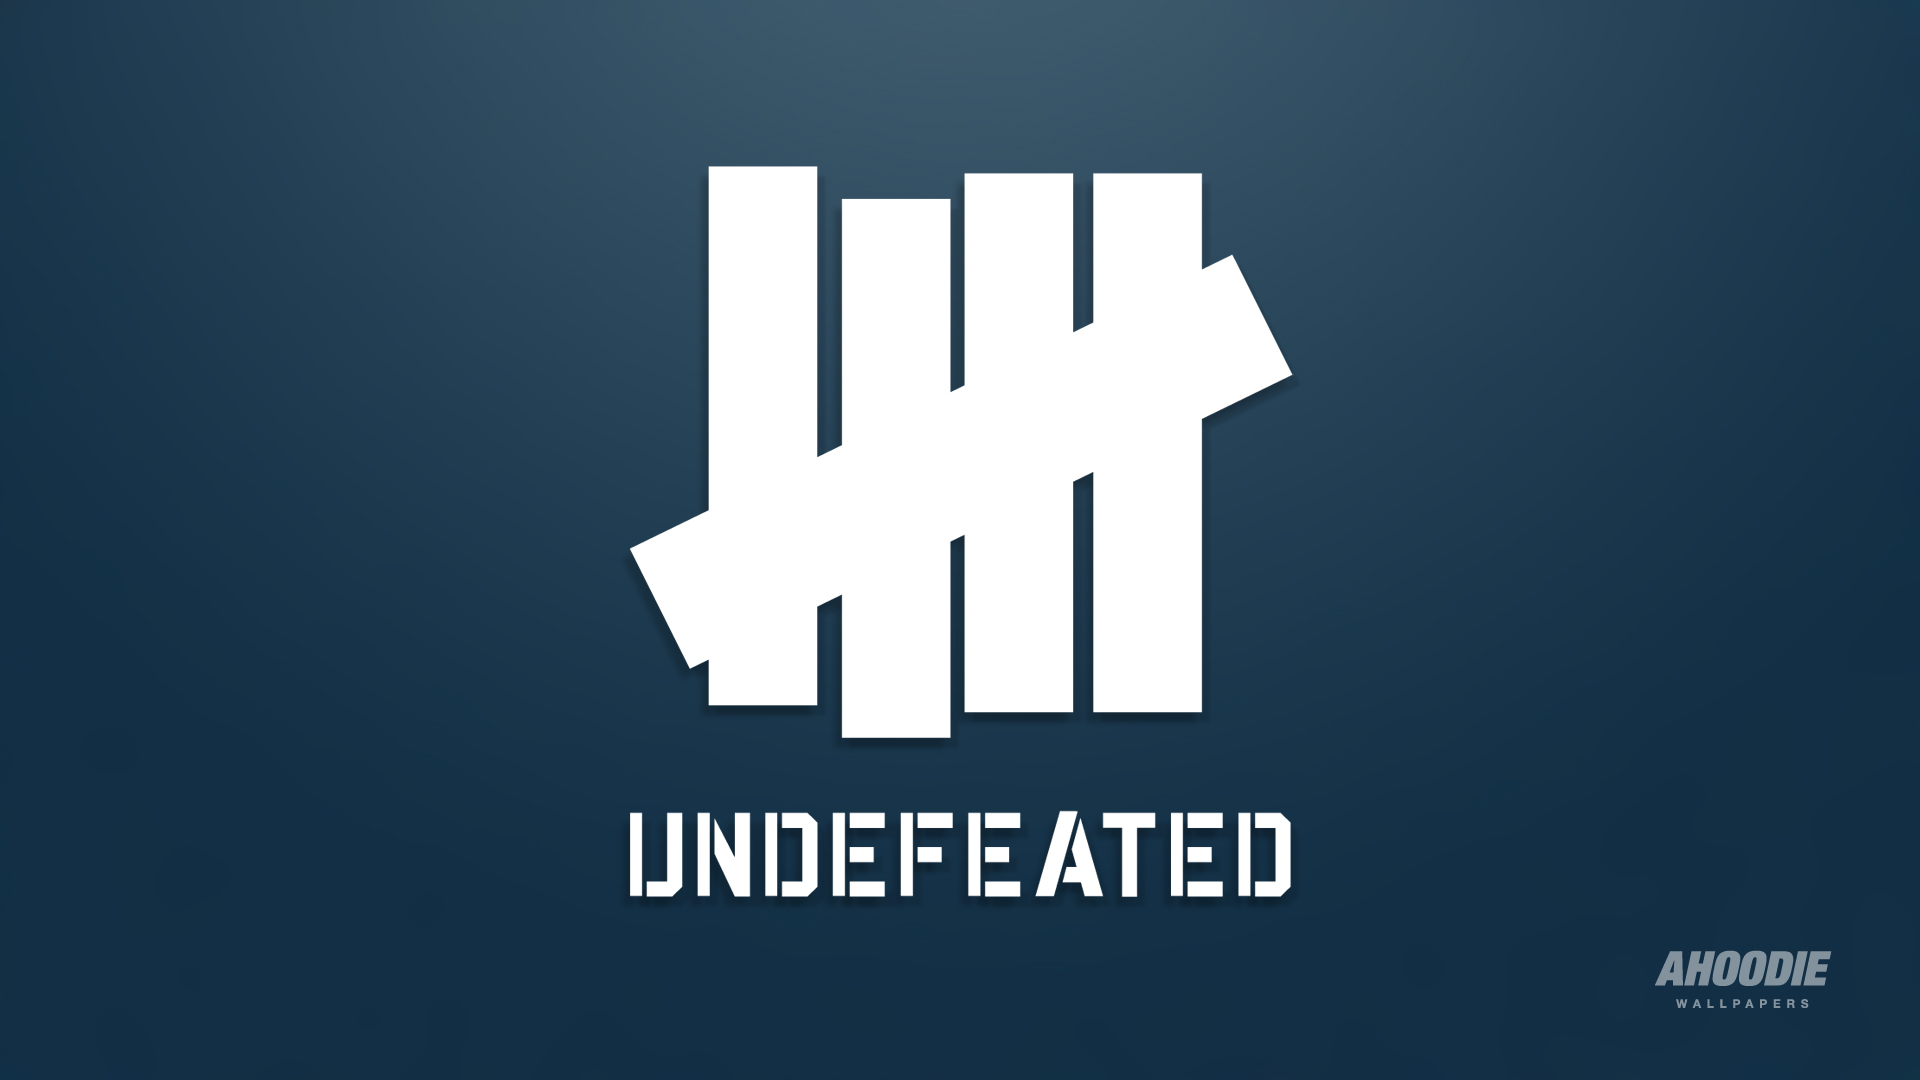 Wallpapers Undefeated Ahoodieahoodie 1920x1080 #undefeated